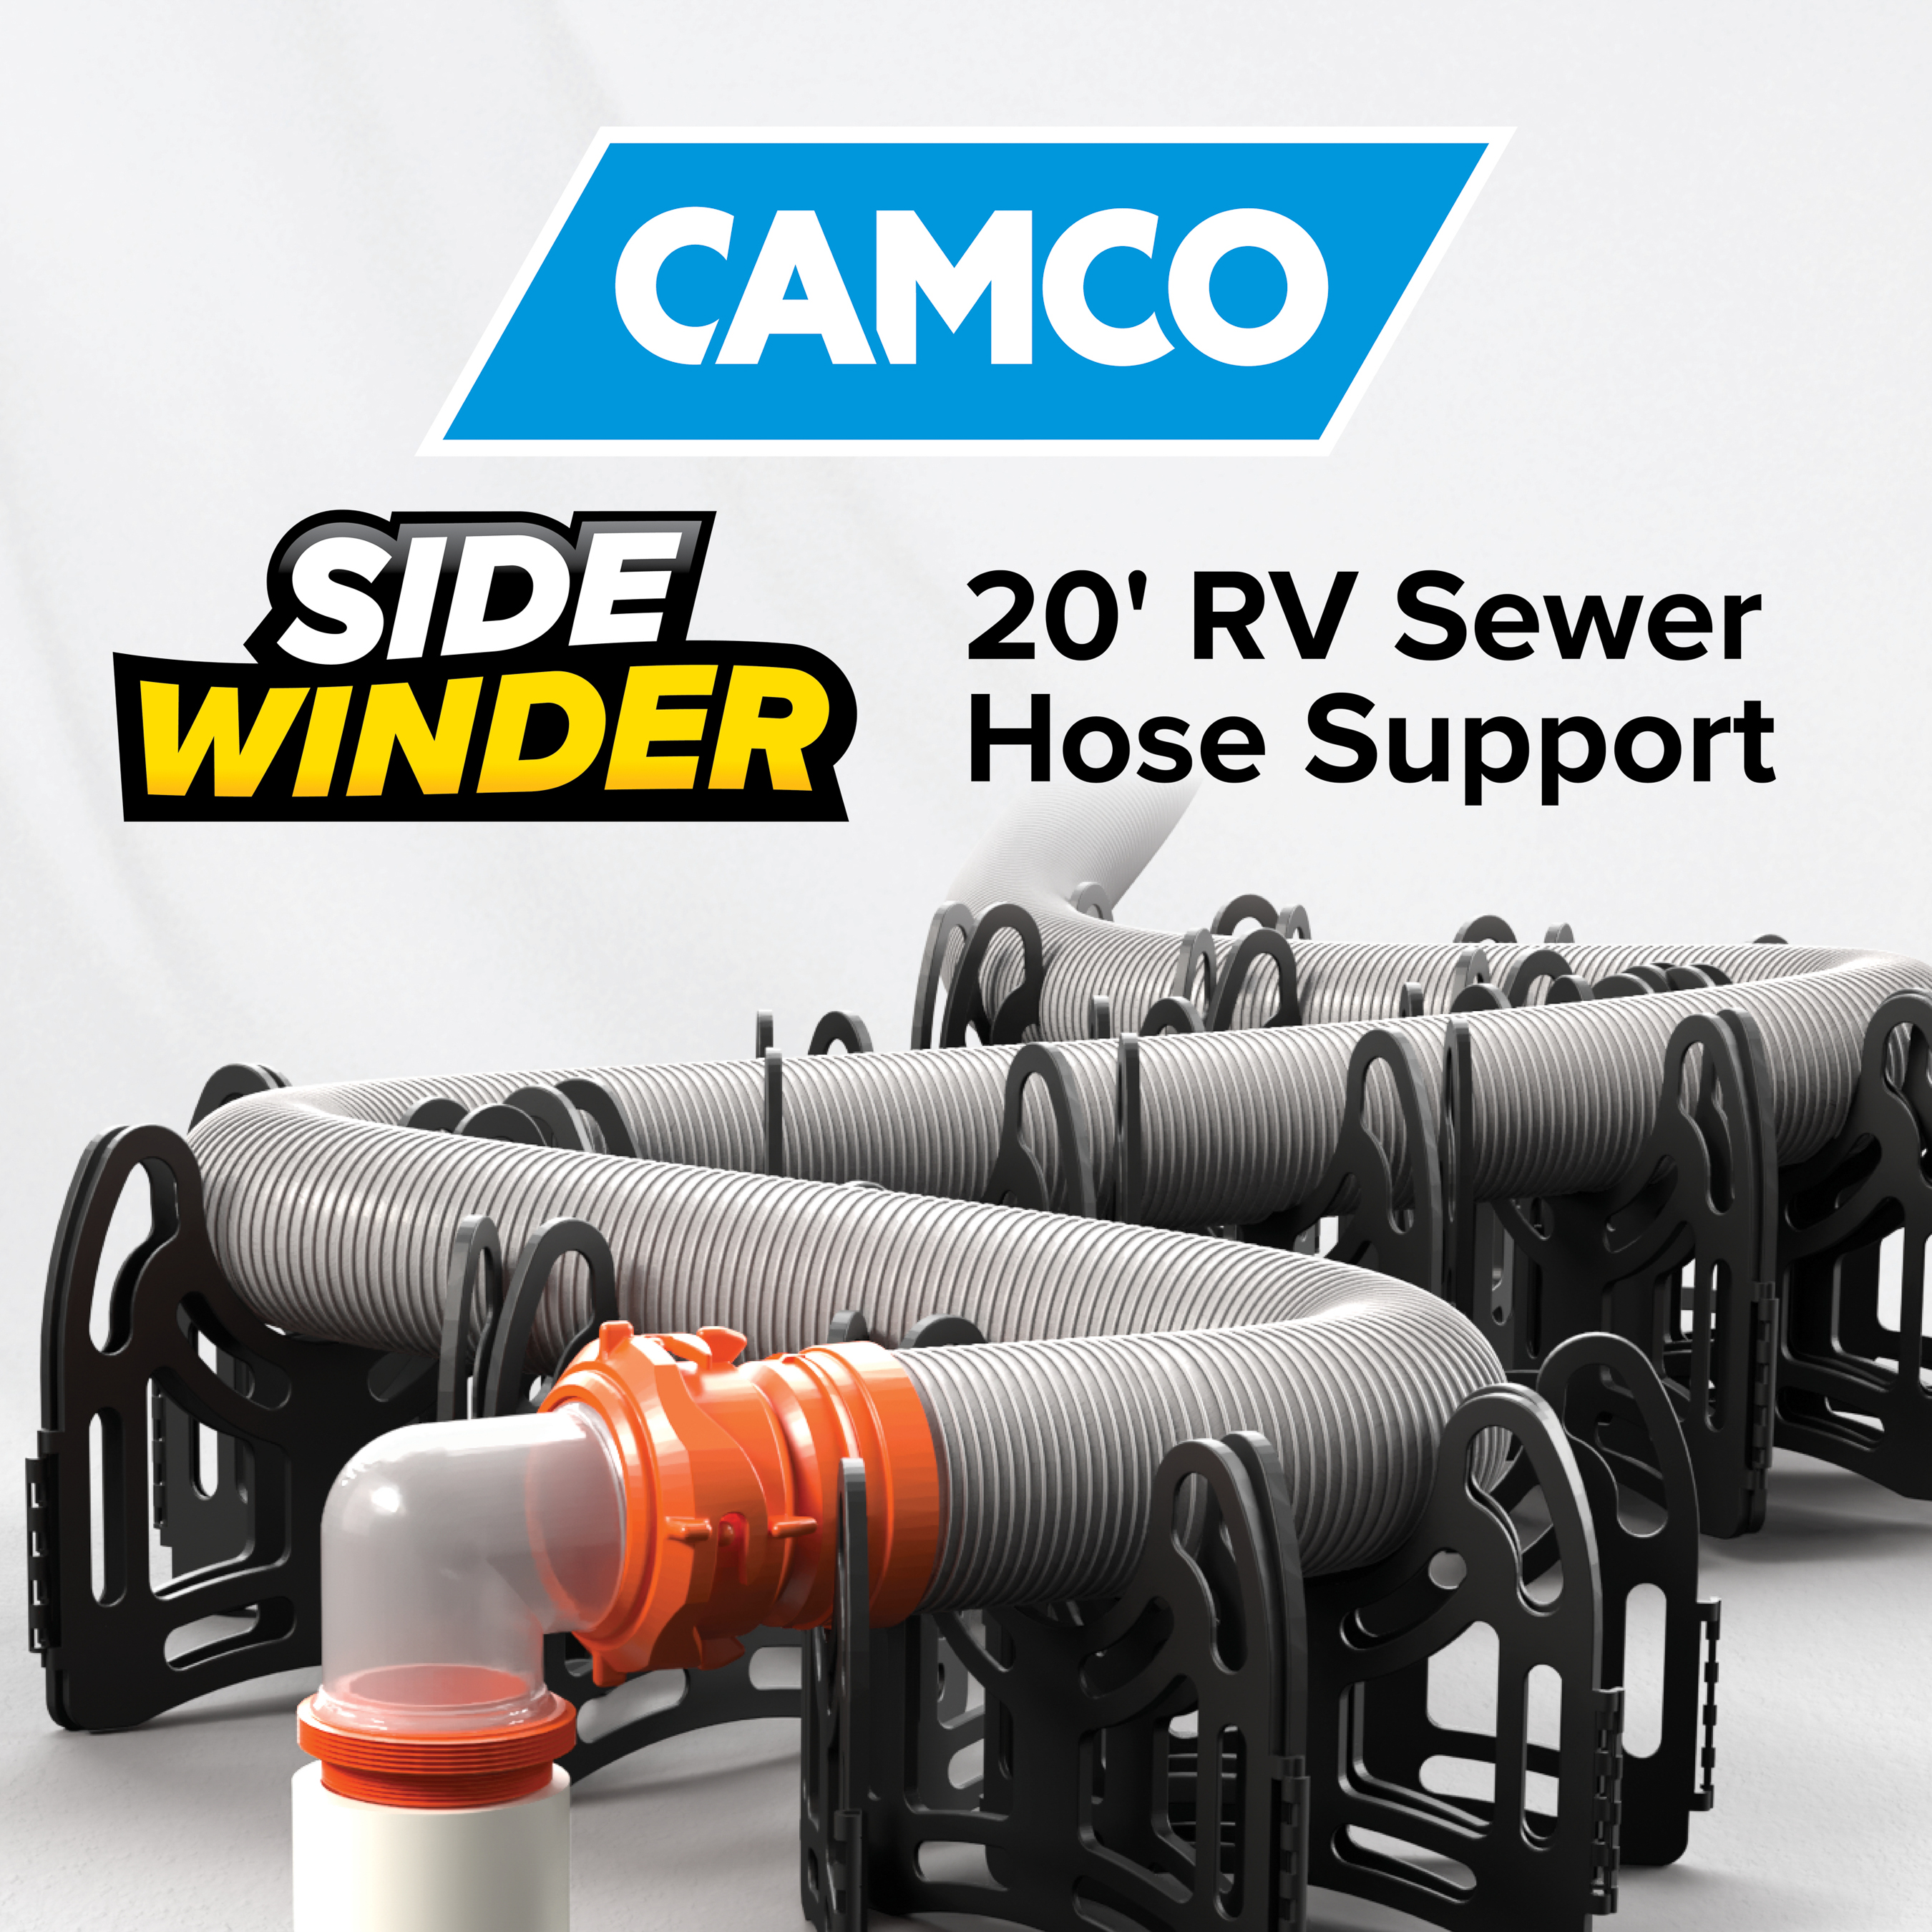 Camco Sidewinder RV Sewer Hose Support - Black, Heavy Duty Plastic - 20-Foot (43051) - image 3 of 8